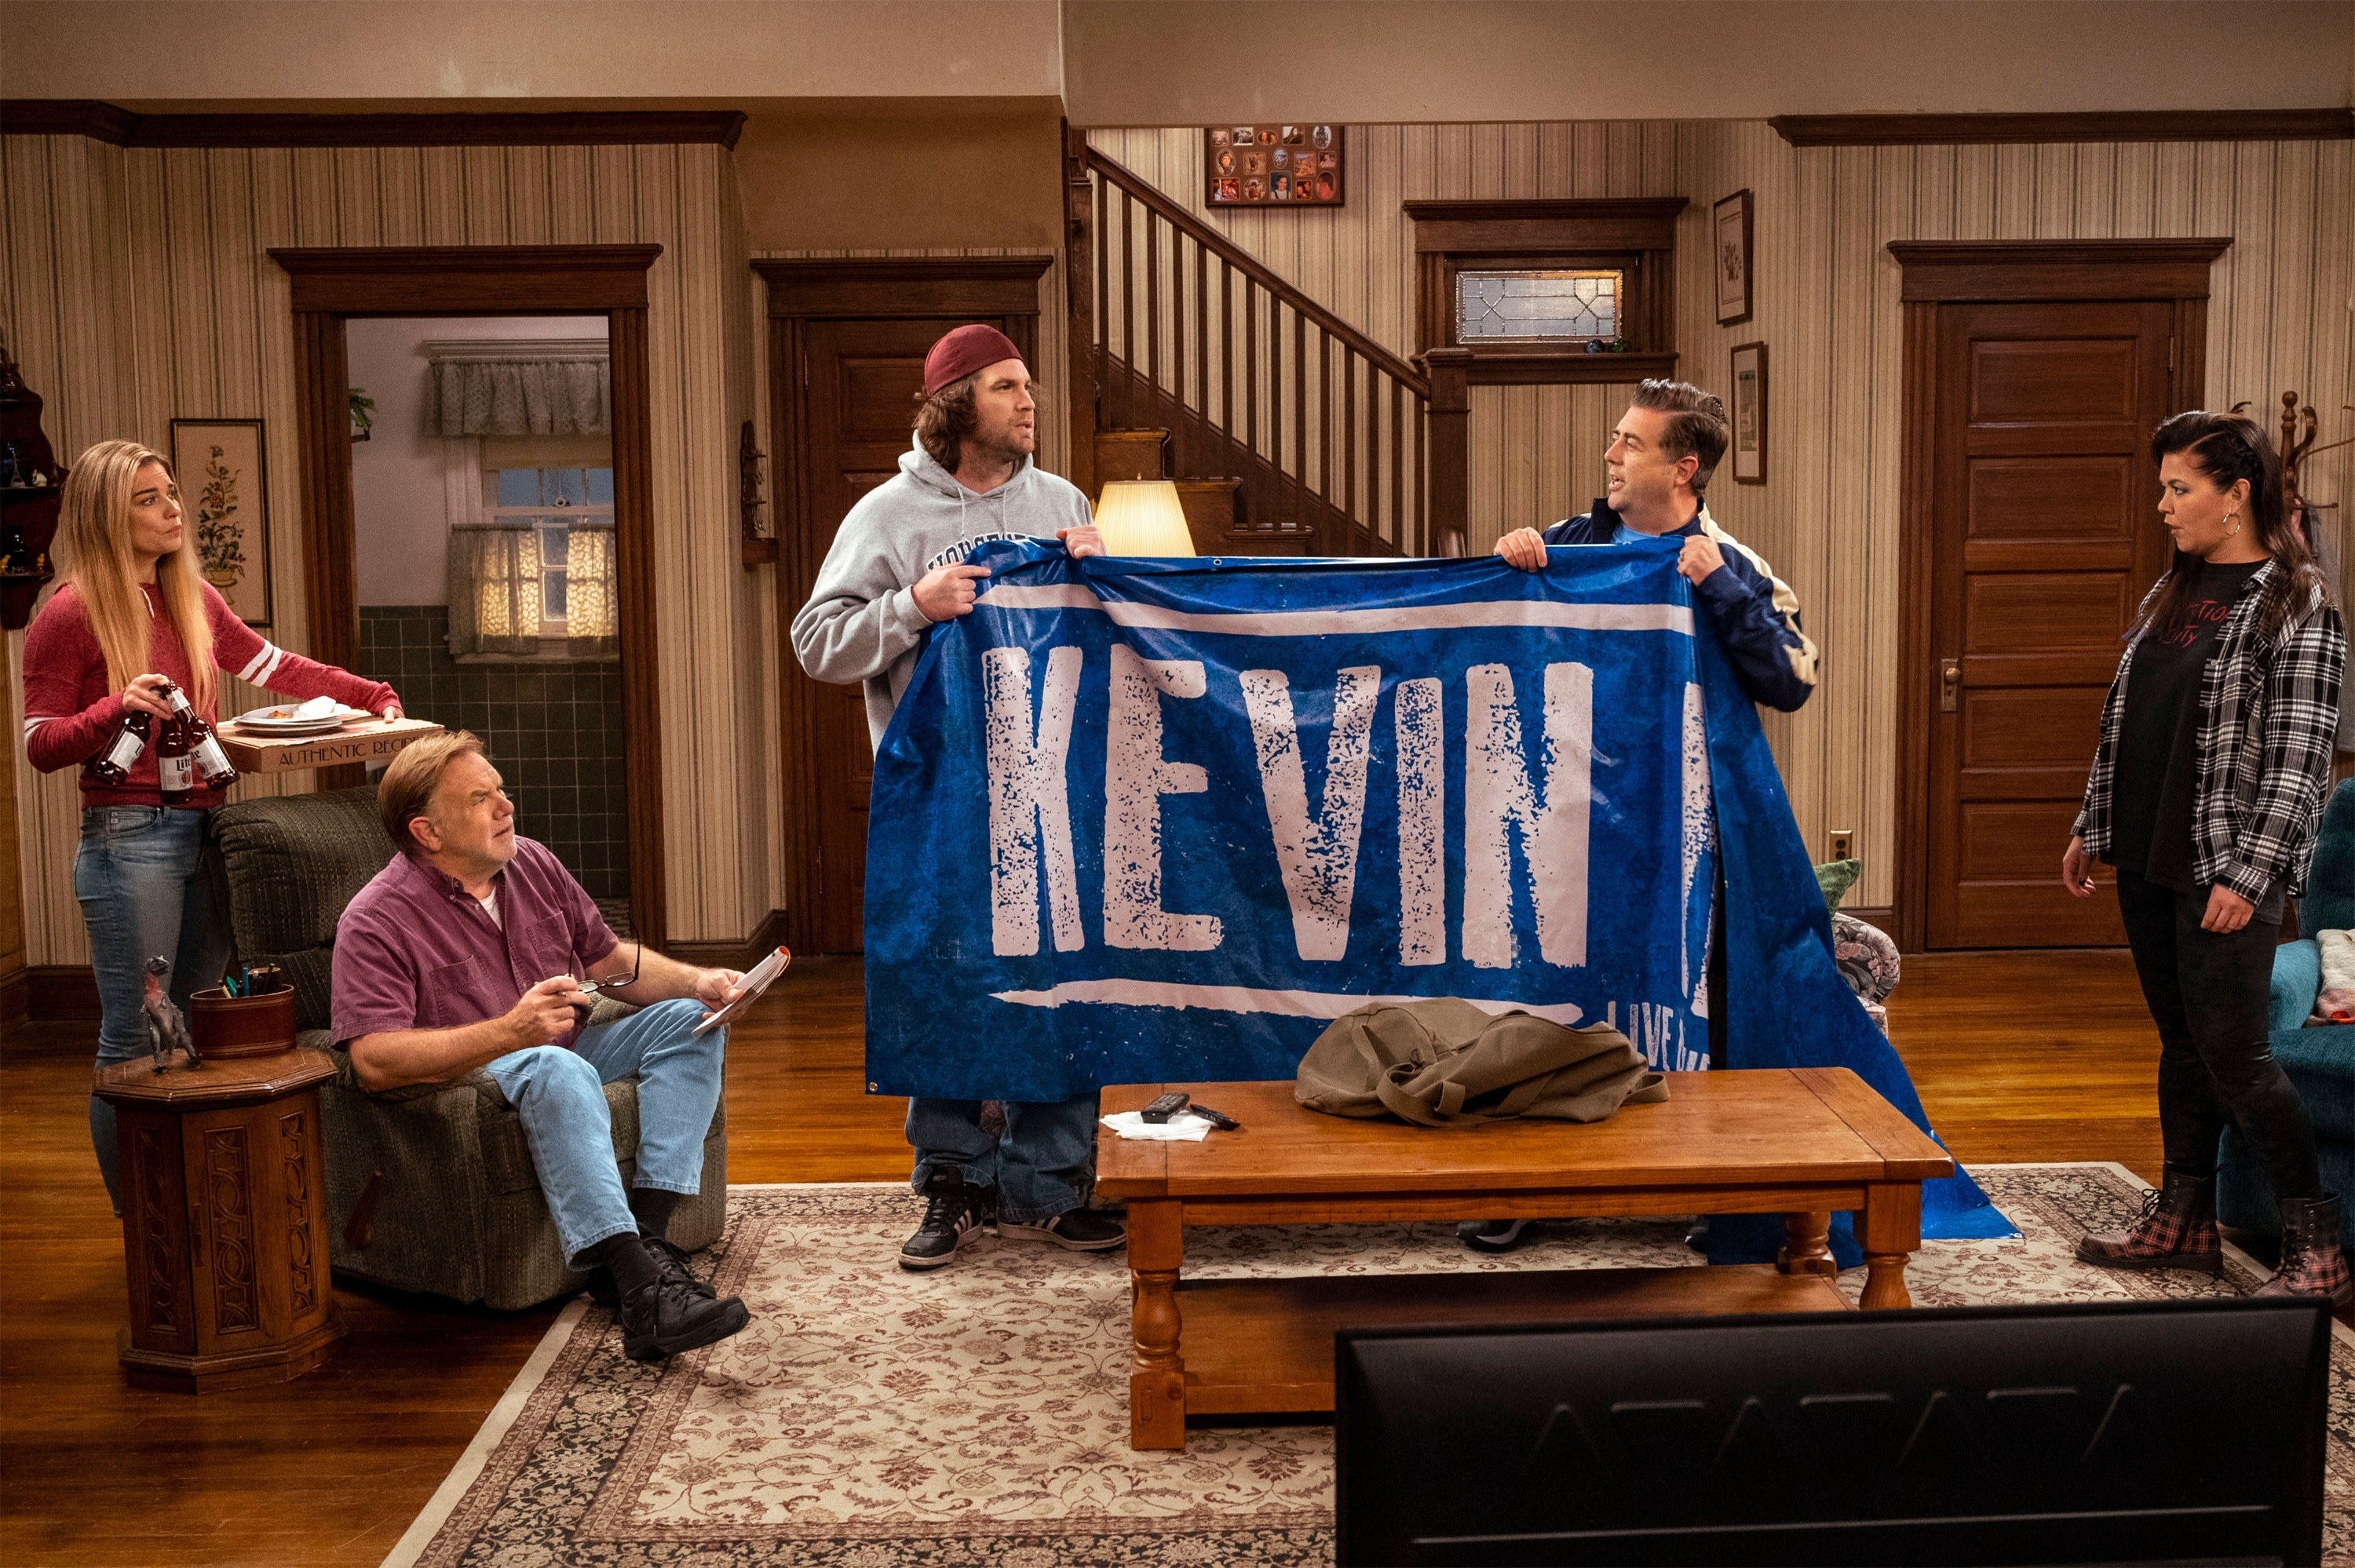 In the sitcom living room, kevin&#x27;s friends hold up a giant blanket reading &quot;Kevin&quot;